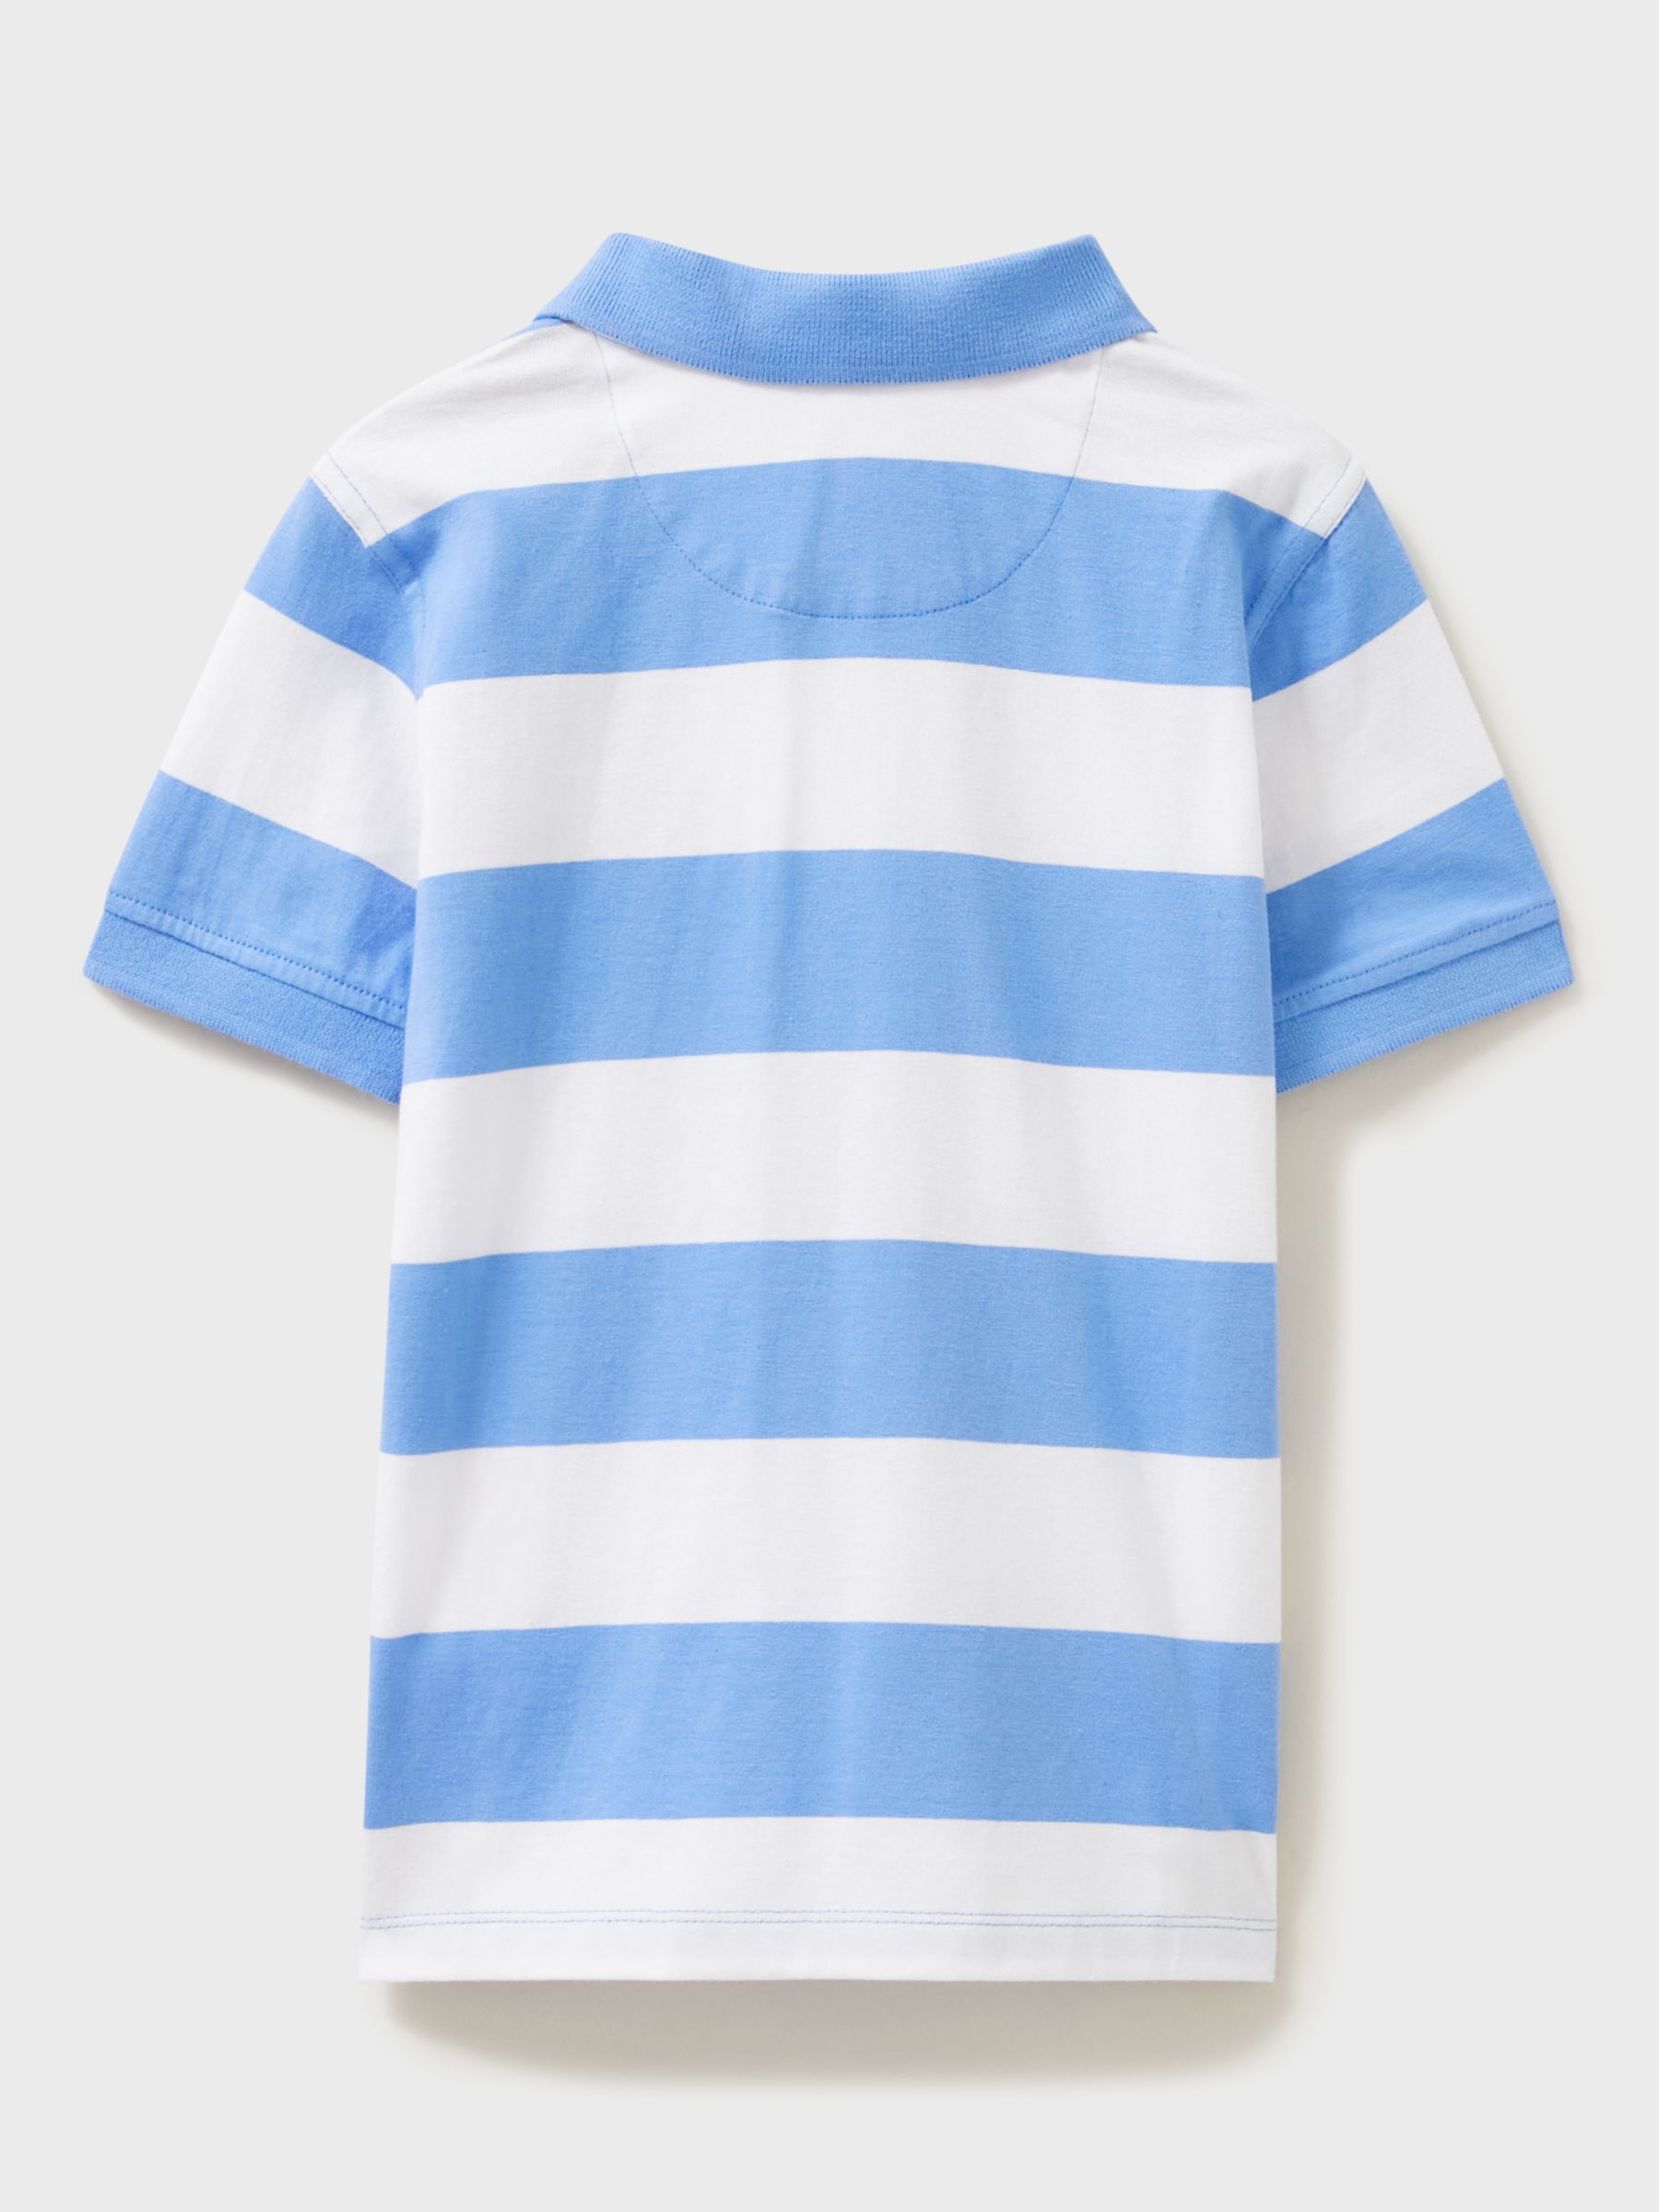 Crew Clothing Kids' Short Sleeve Striped Pique Polo Shirt, Blue/White, 8-9 years